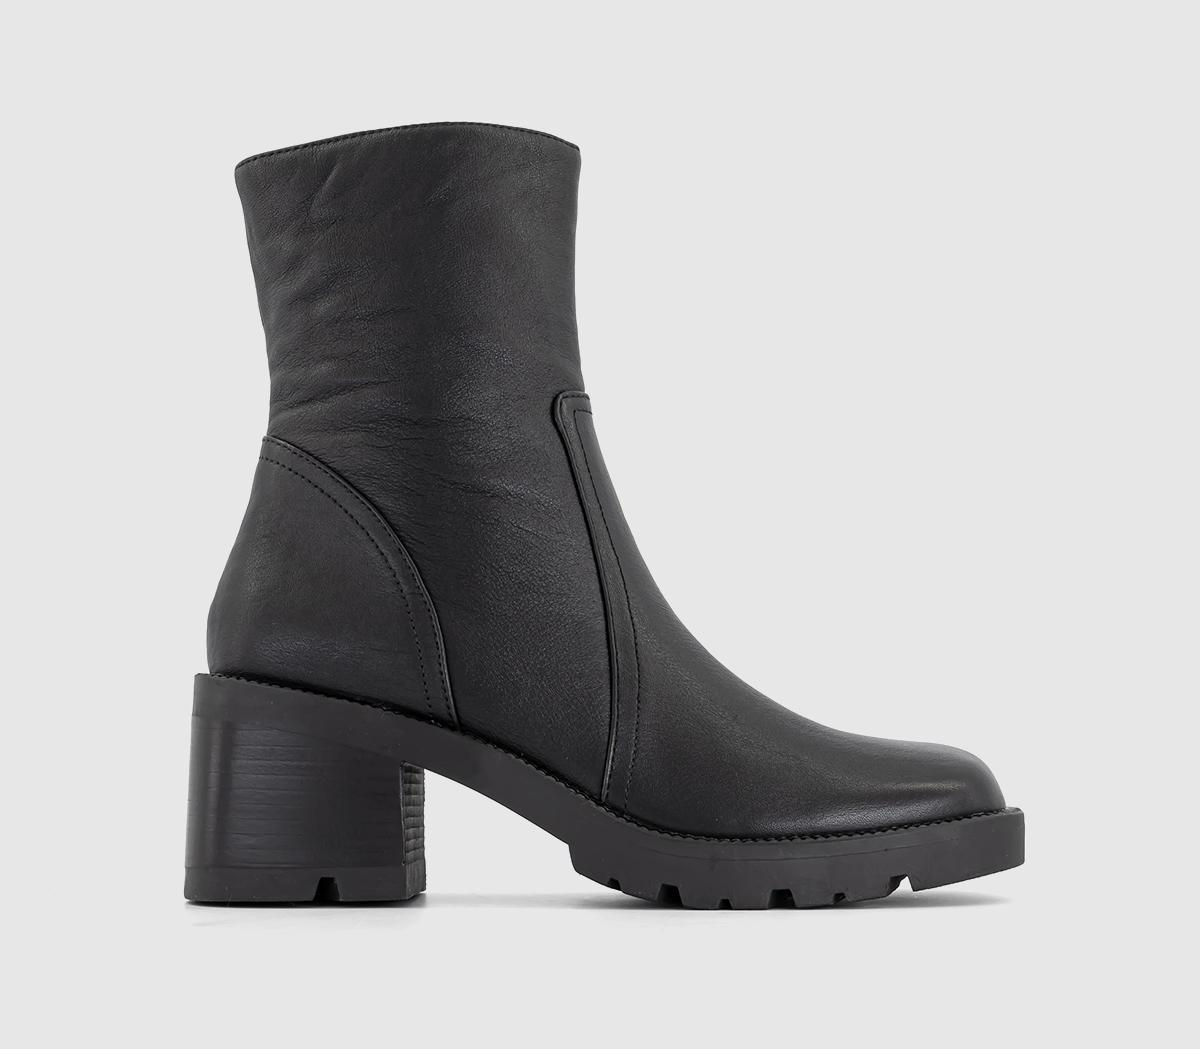 Amplify Cleated Sole Platform Boots Black Leather